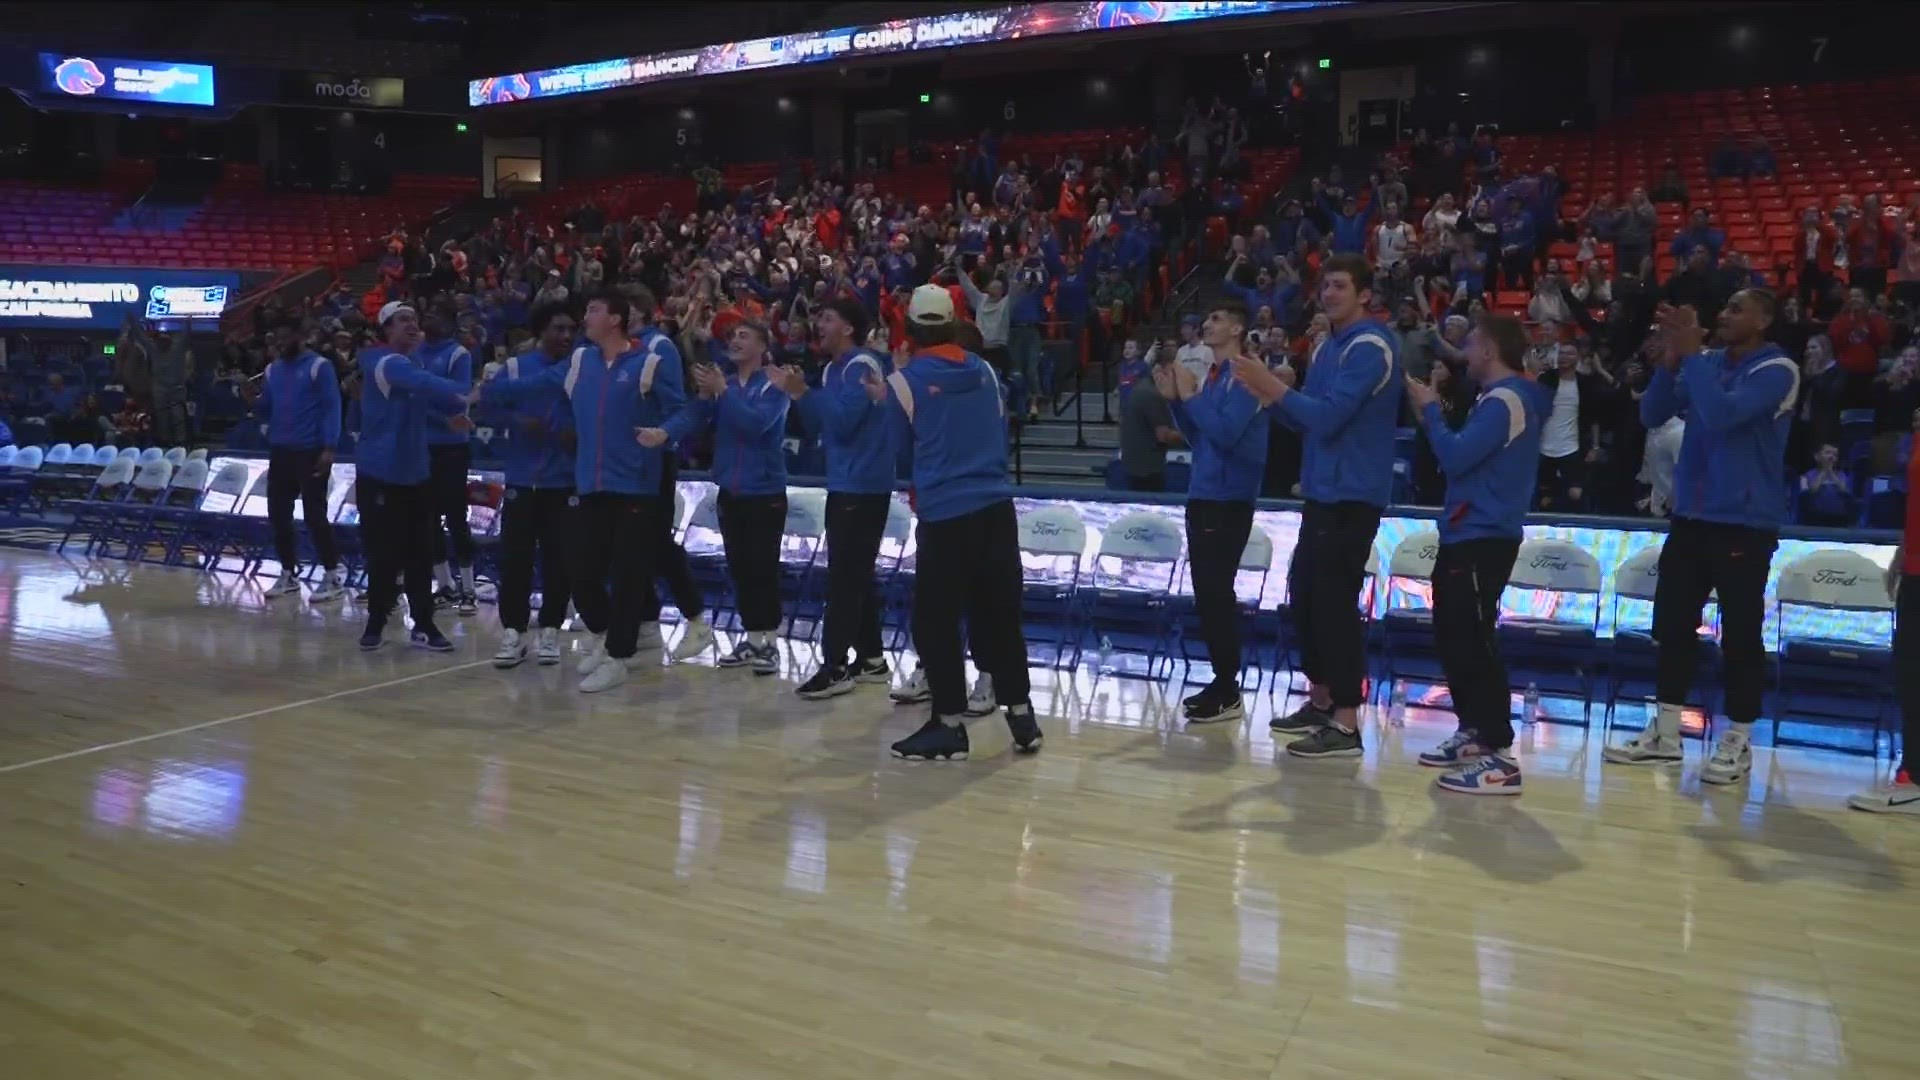 BSU is a part of March Madness.